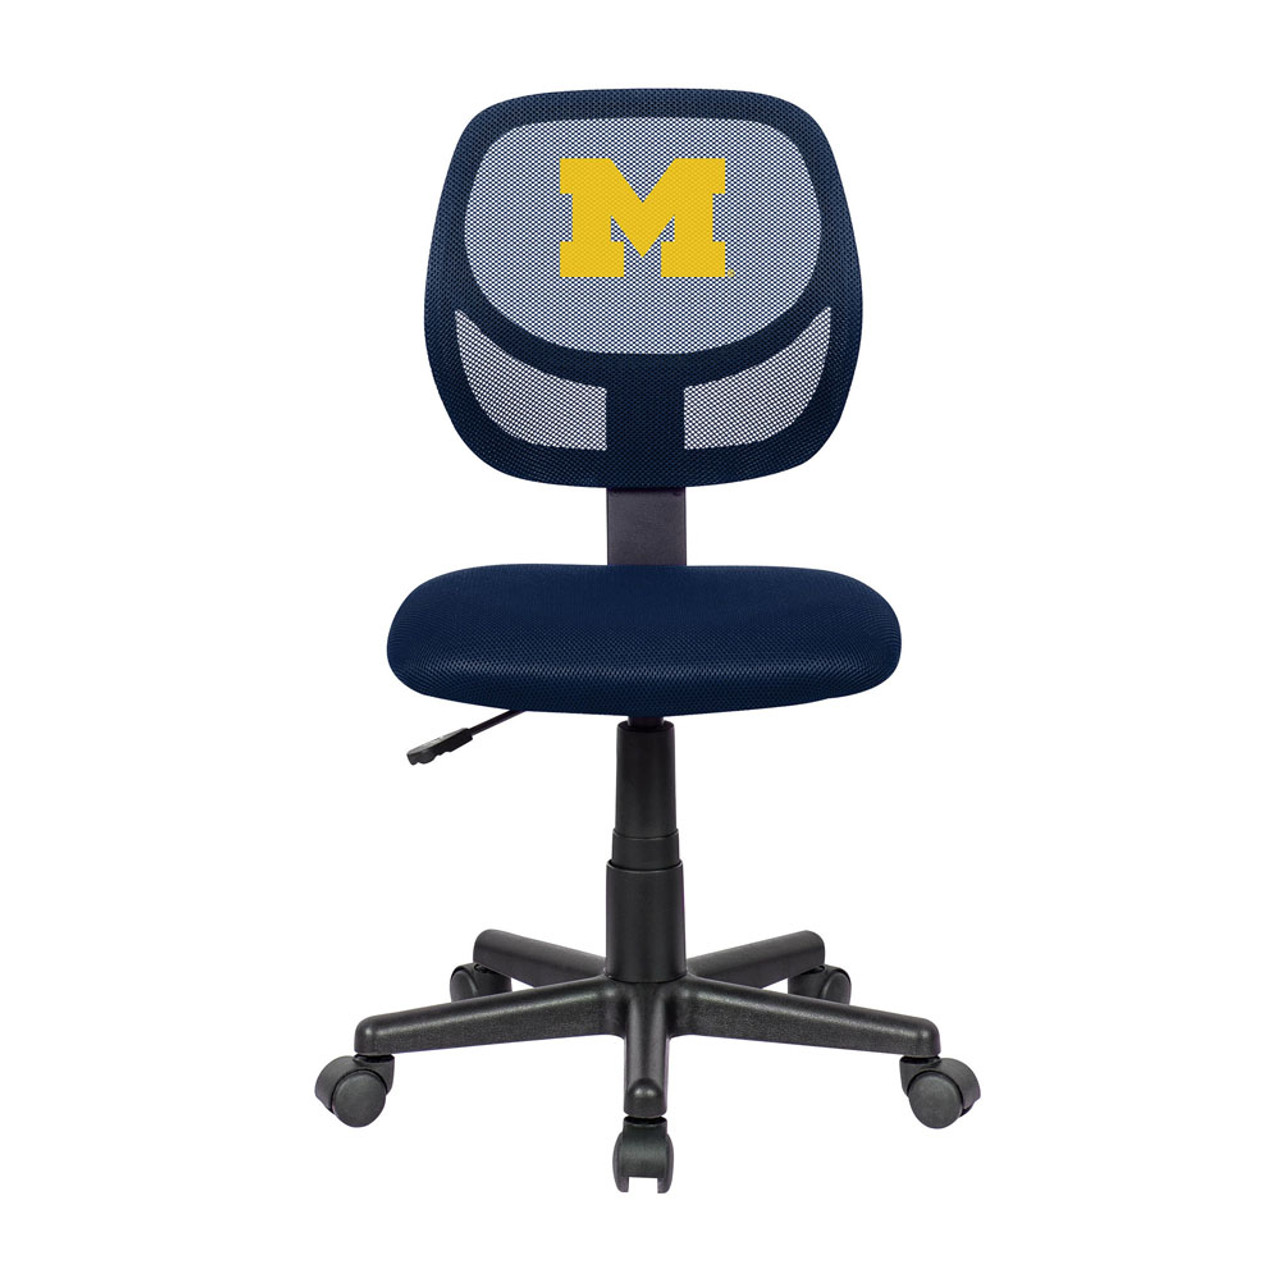 496-3009, Michigan, MI, Wolverines , Armless, Desk, Task, Chair, FREE SHIPPING, NFL, Imperial